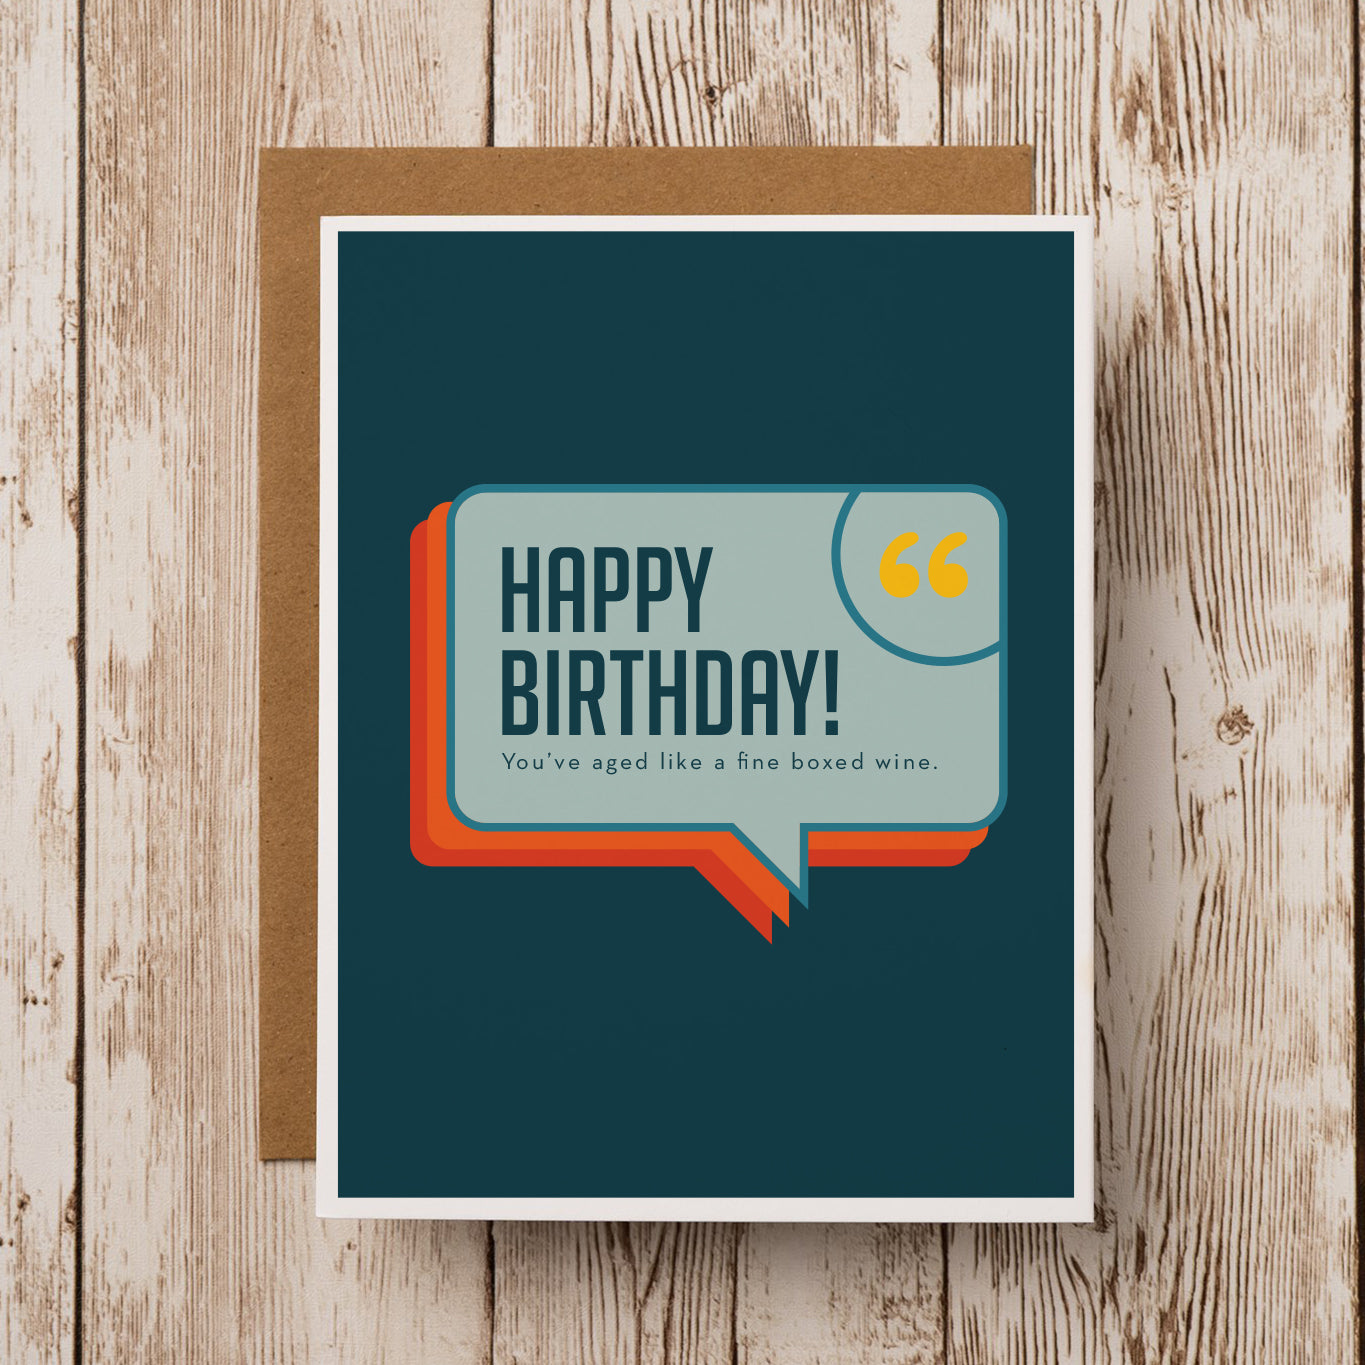 A uniquely sarcastic birthday greeting card that reads "Happy Birthday! You've aged like a fine boxed wine."